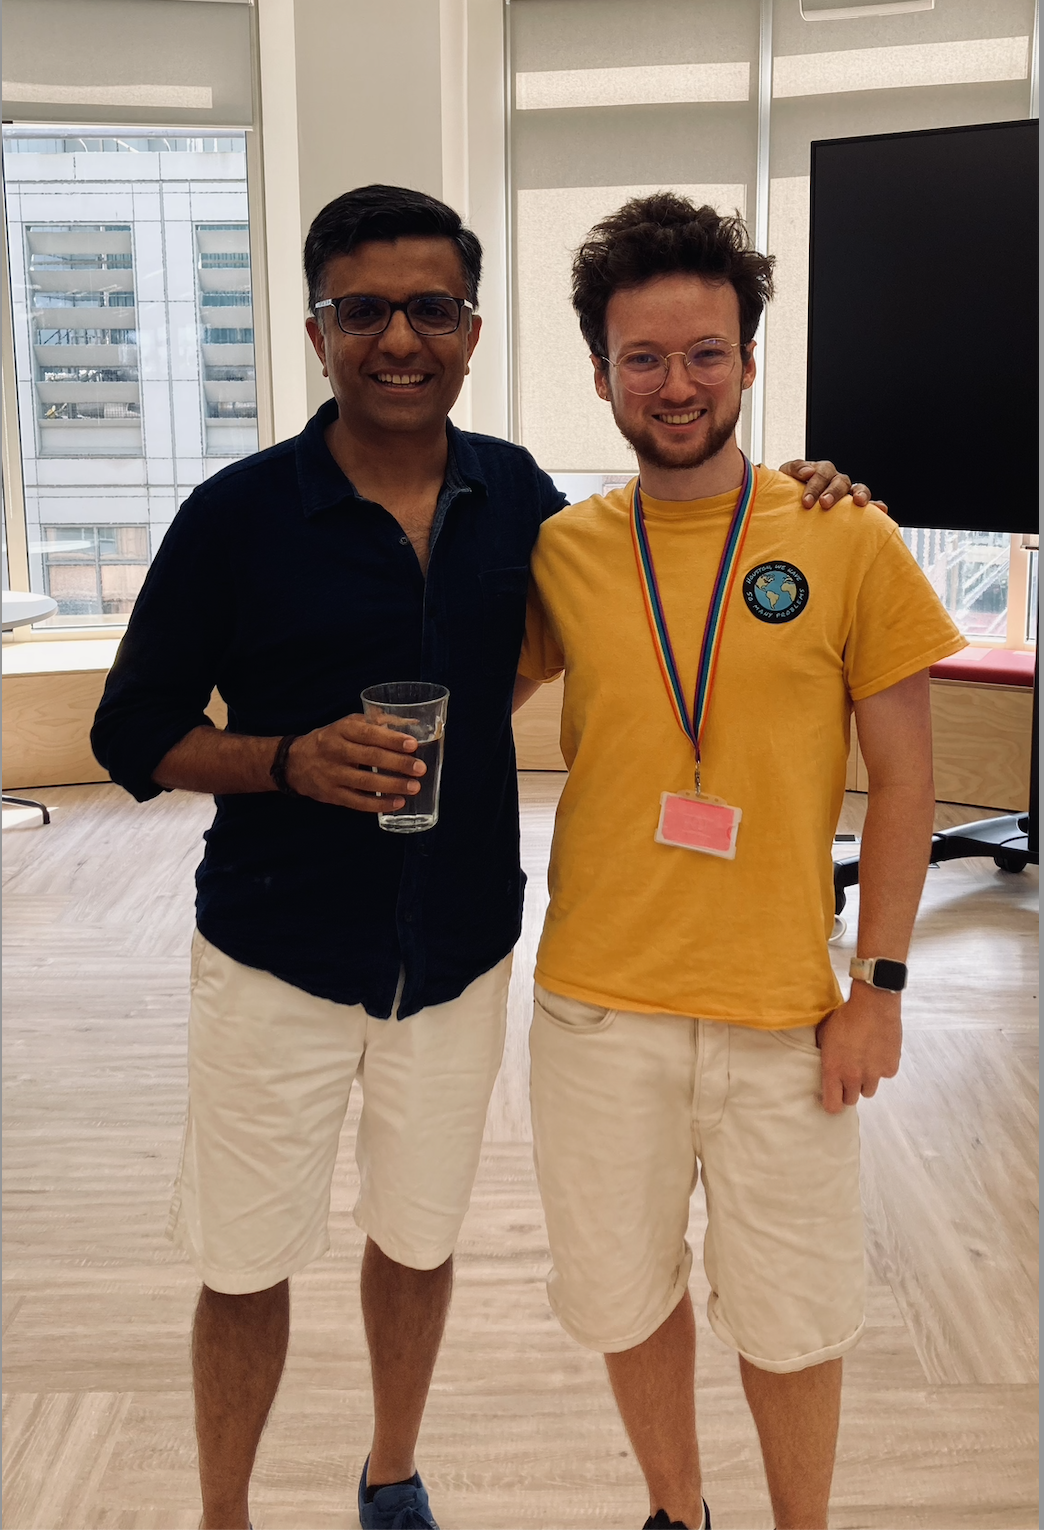 The author Bee meets Monzo CEO TS Anil. Both are facing the camera wearing tshirts and shorts.